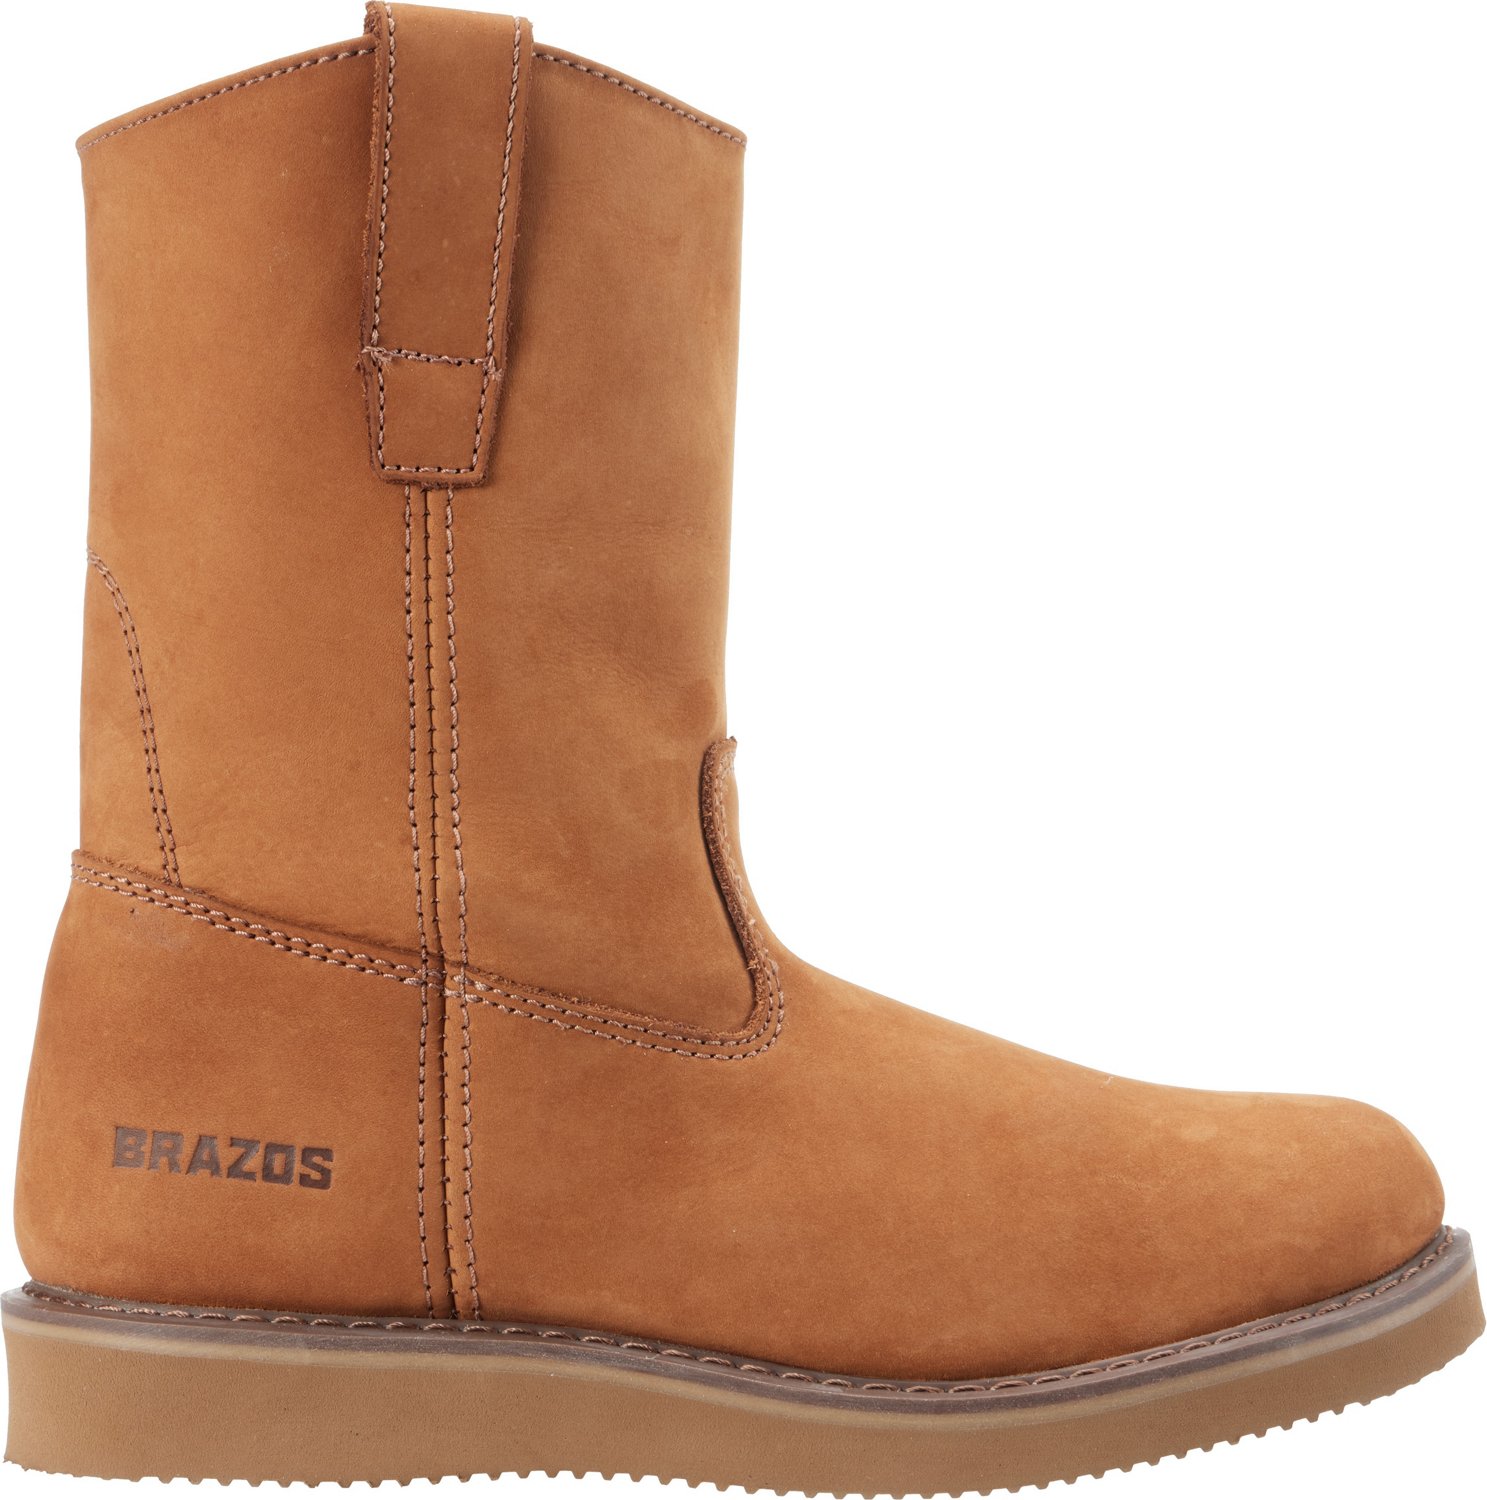 Brazos Men's Wellington Work Boots                                                                                               - view number 1 selected